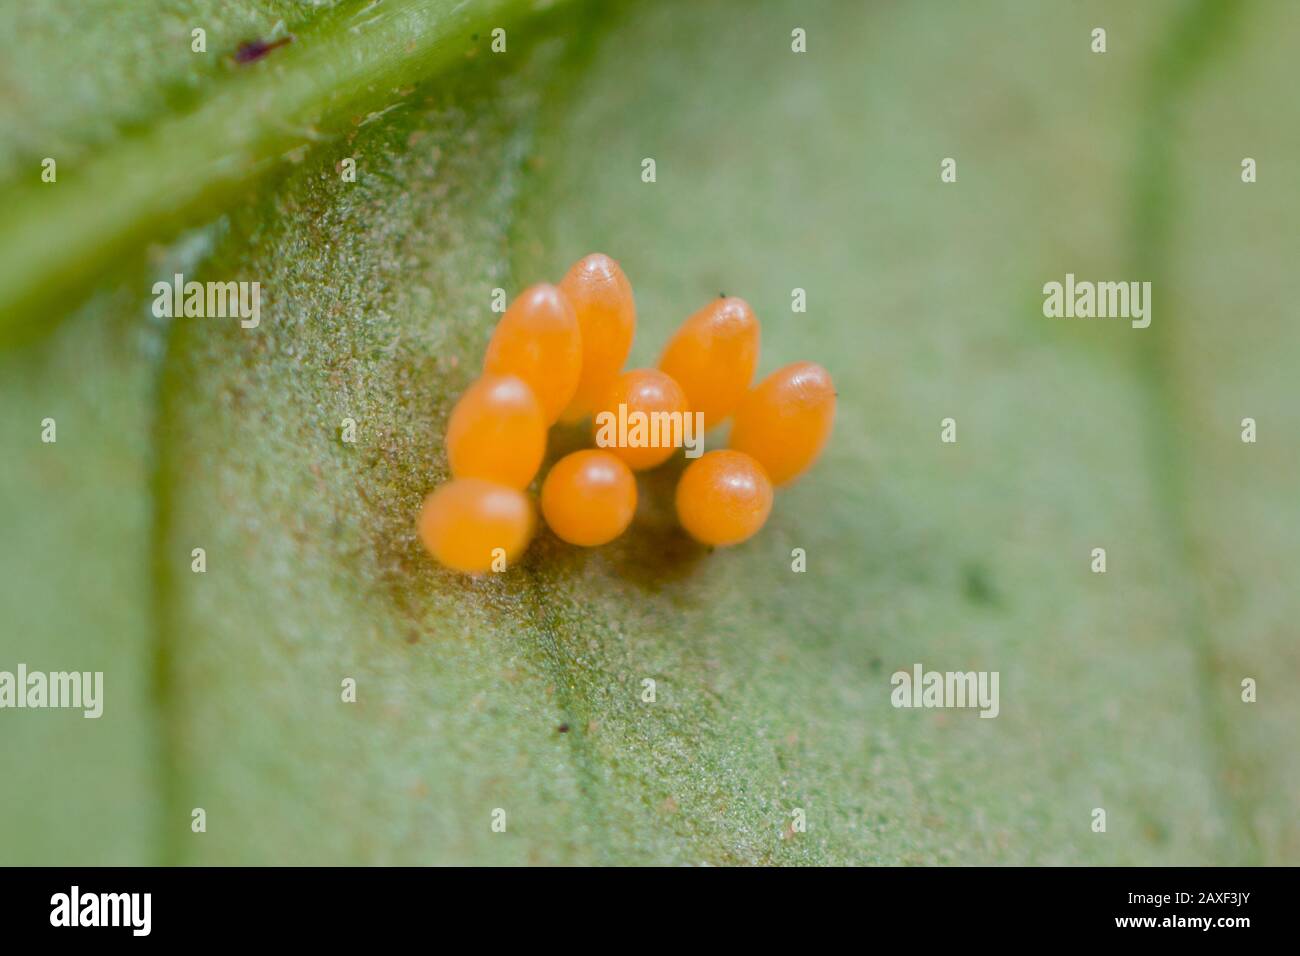 Extreme close-up of insect eggs, ladybug clump of orange eggs on a leaf from a tropical garden Stock Photo